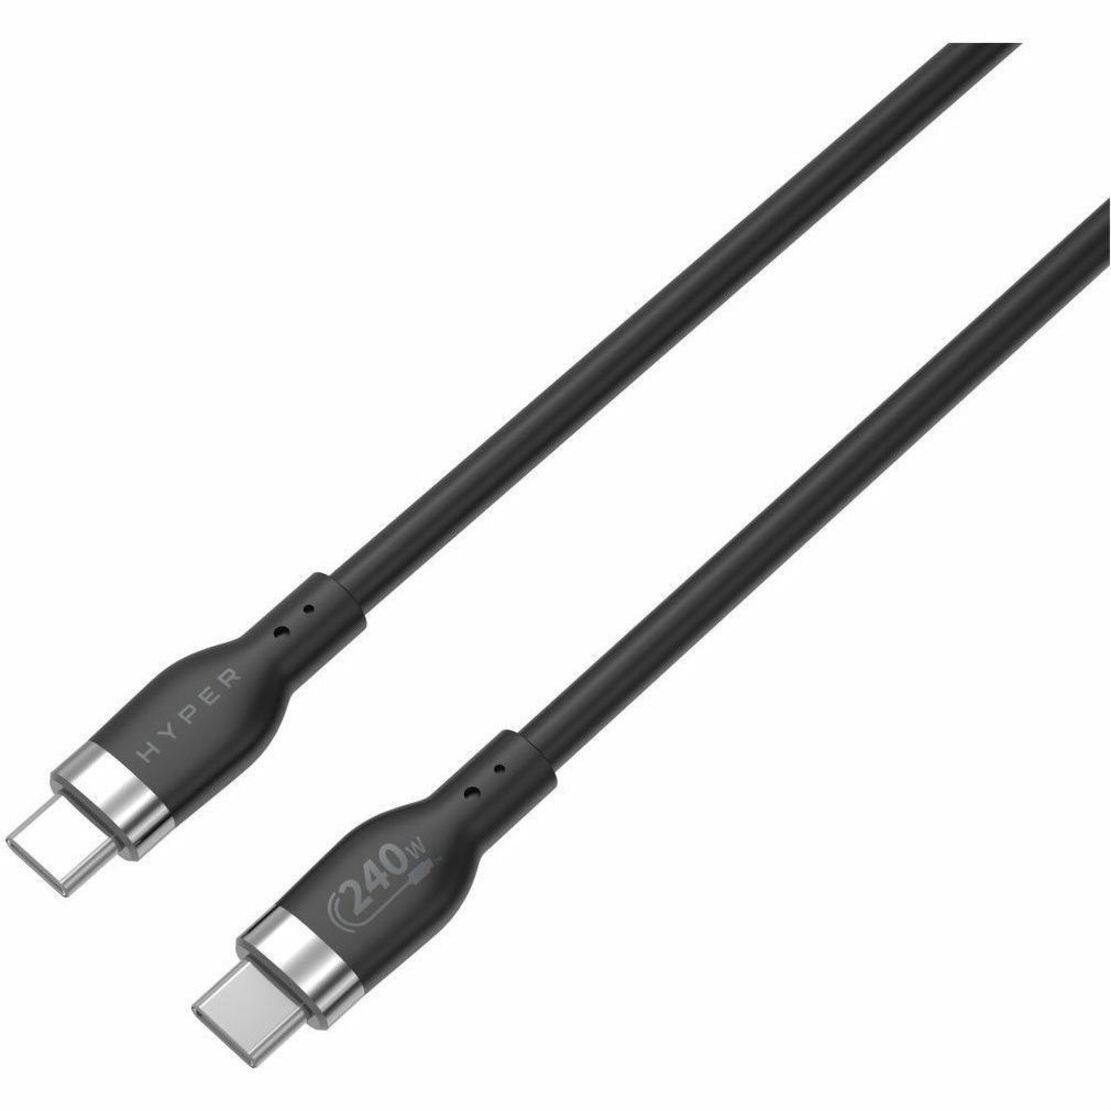 Targus Charging Cable - 3.28 ft Cord Length - USB Type C (HJ4001BKGL)